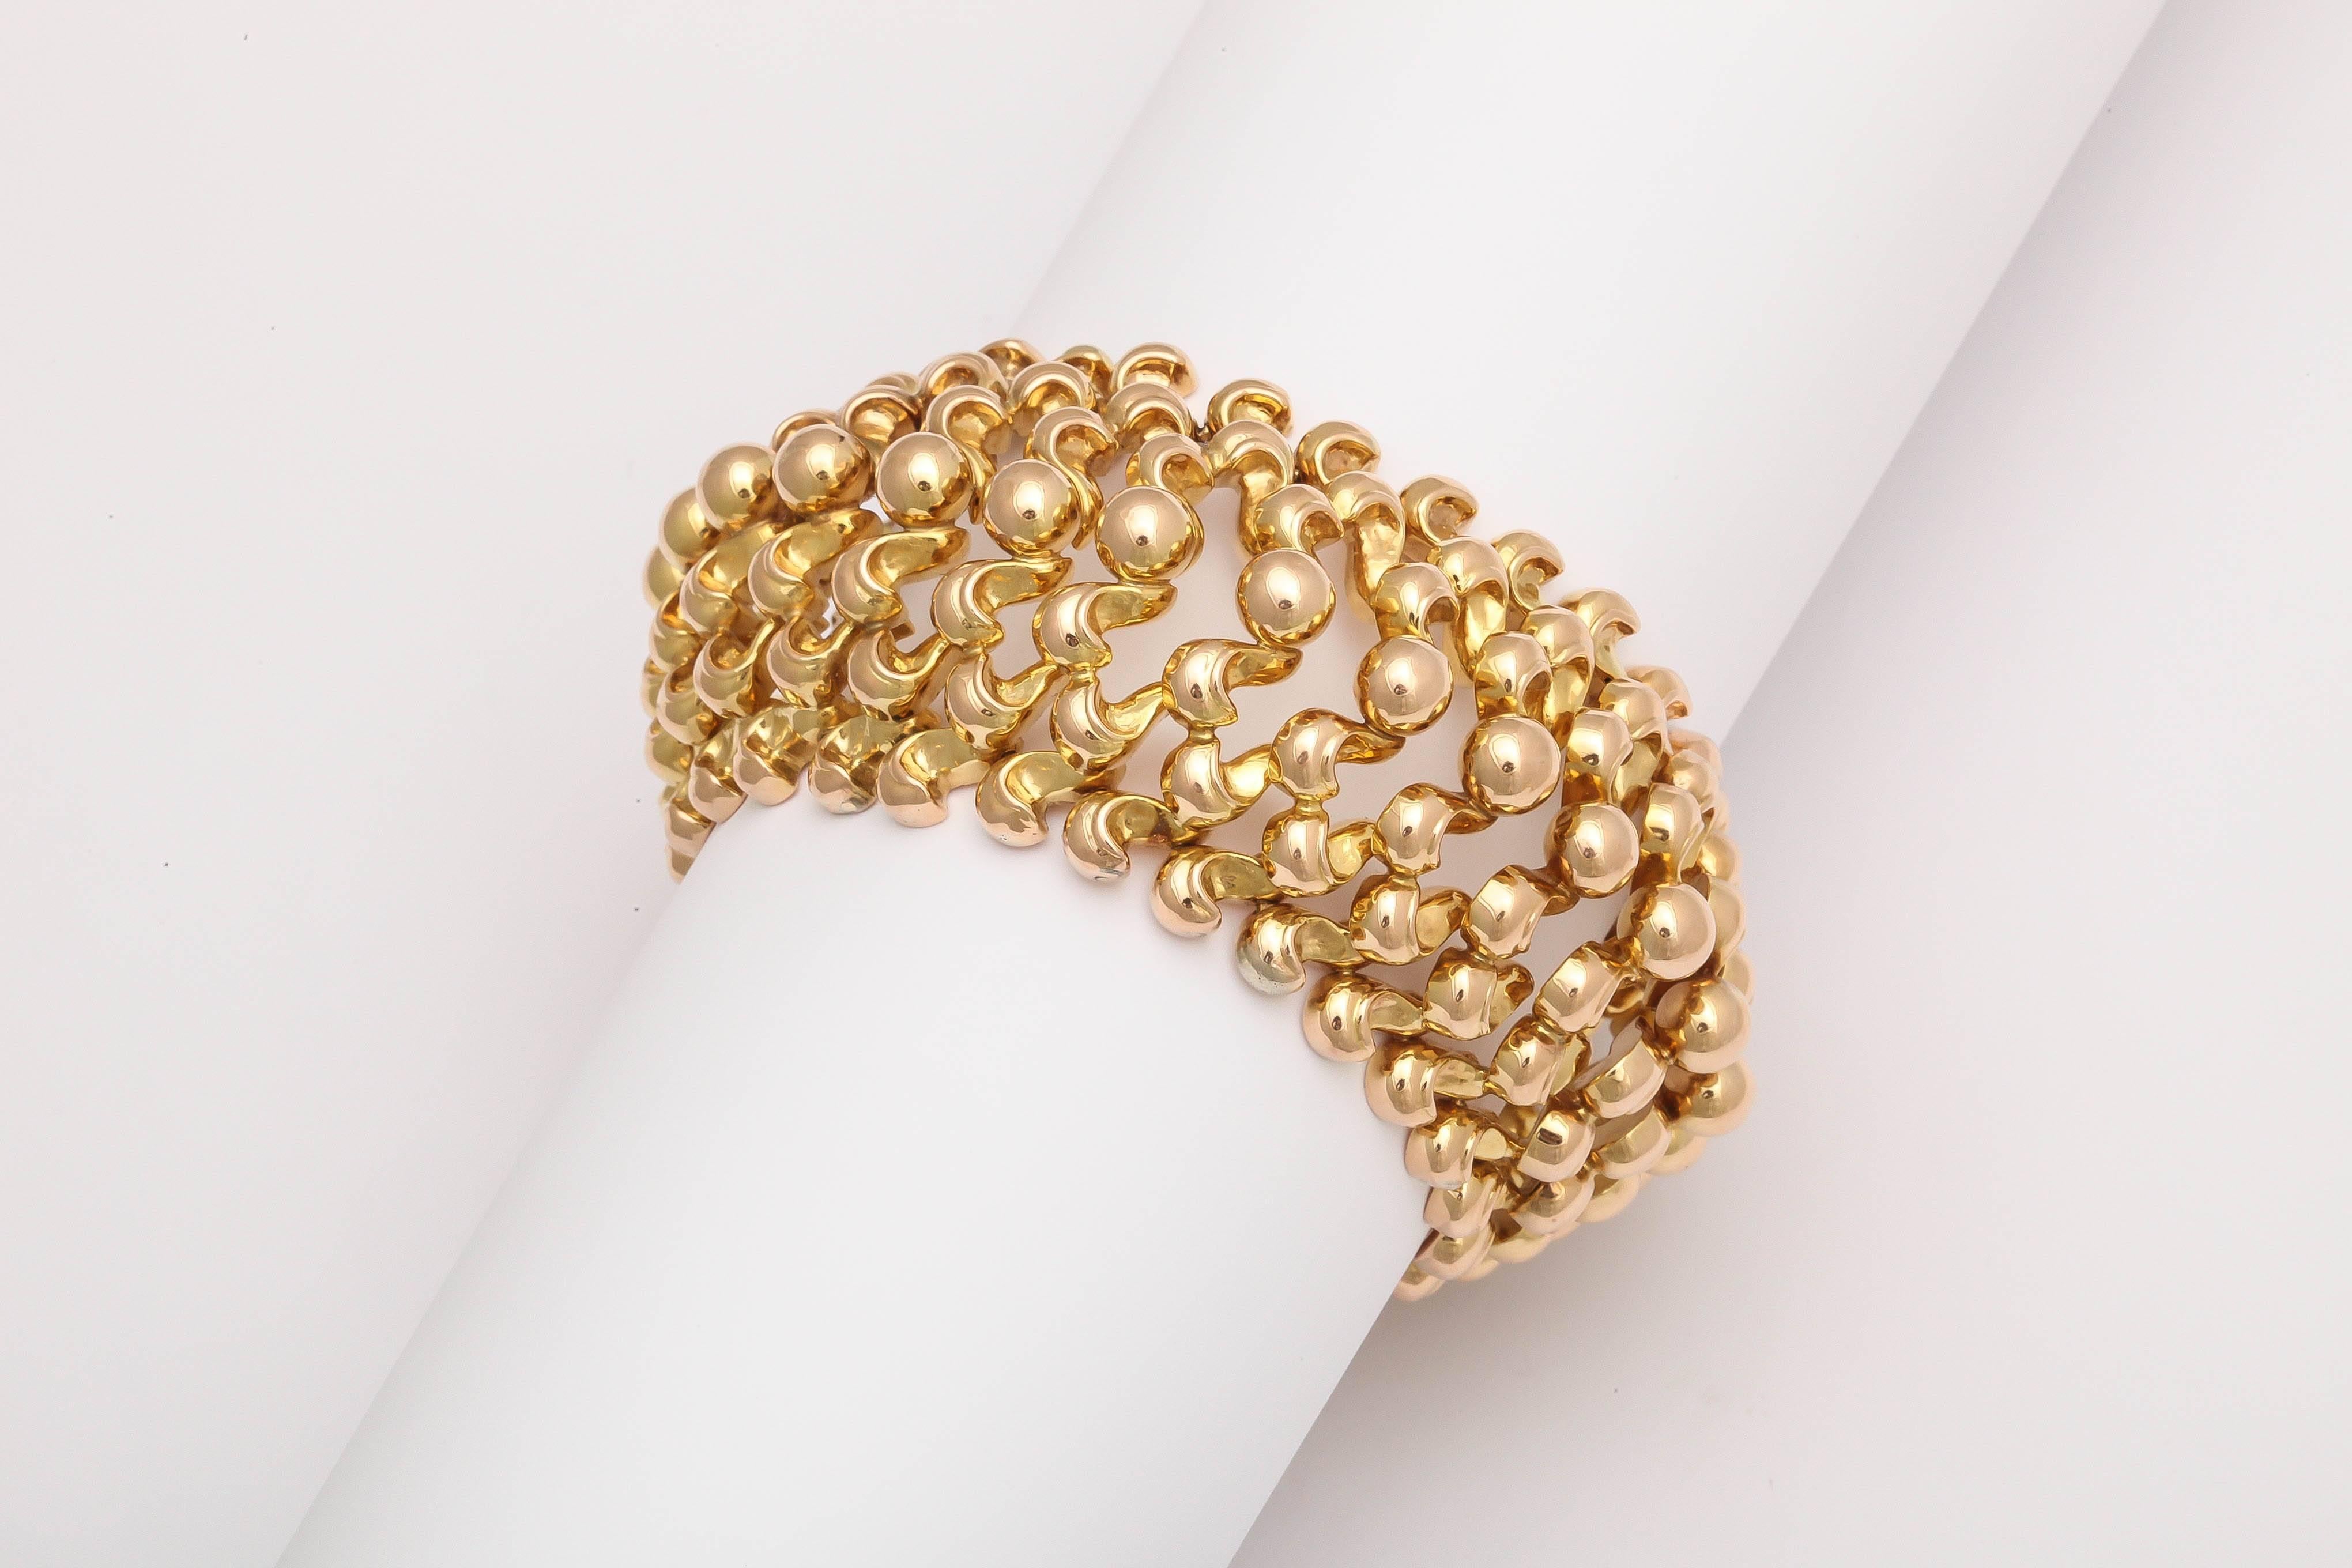 A stunning wide flexible 18-karat retro gold bracelet with center of gold beads  flanked on each side by three rows of cone form beads
The center row is raised which gives the illusion of a cuff.